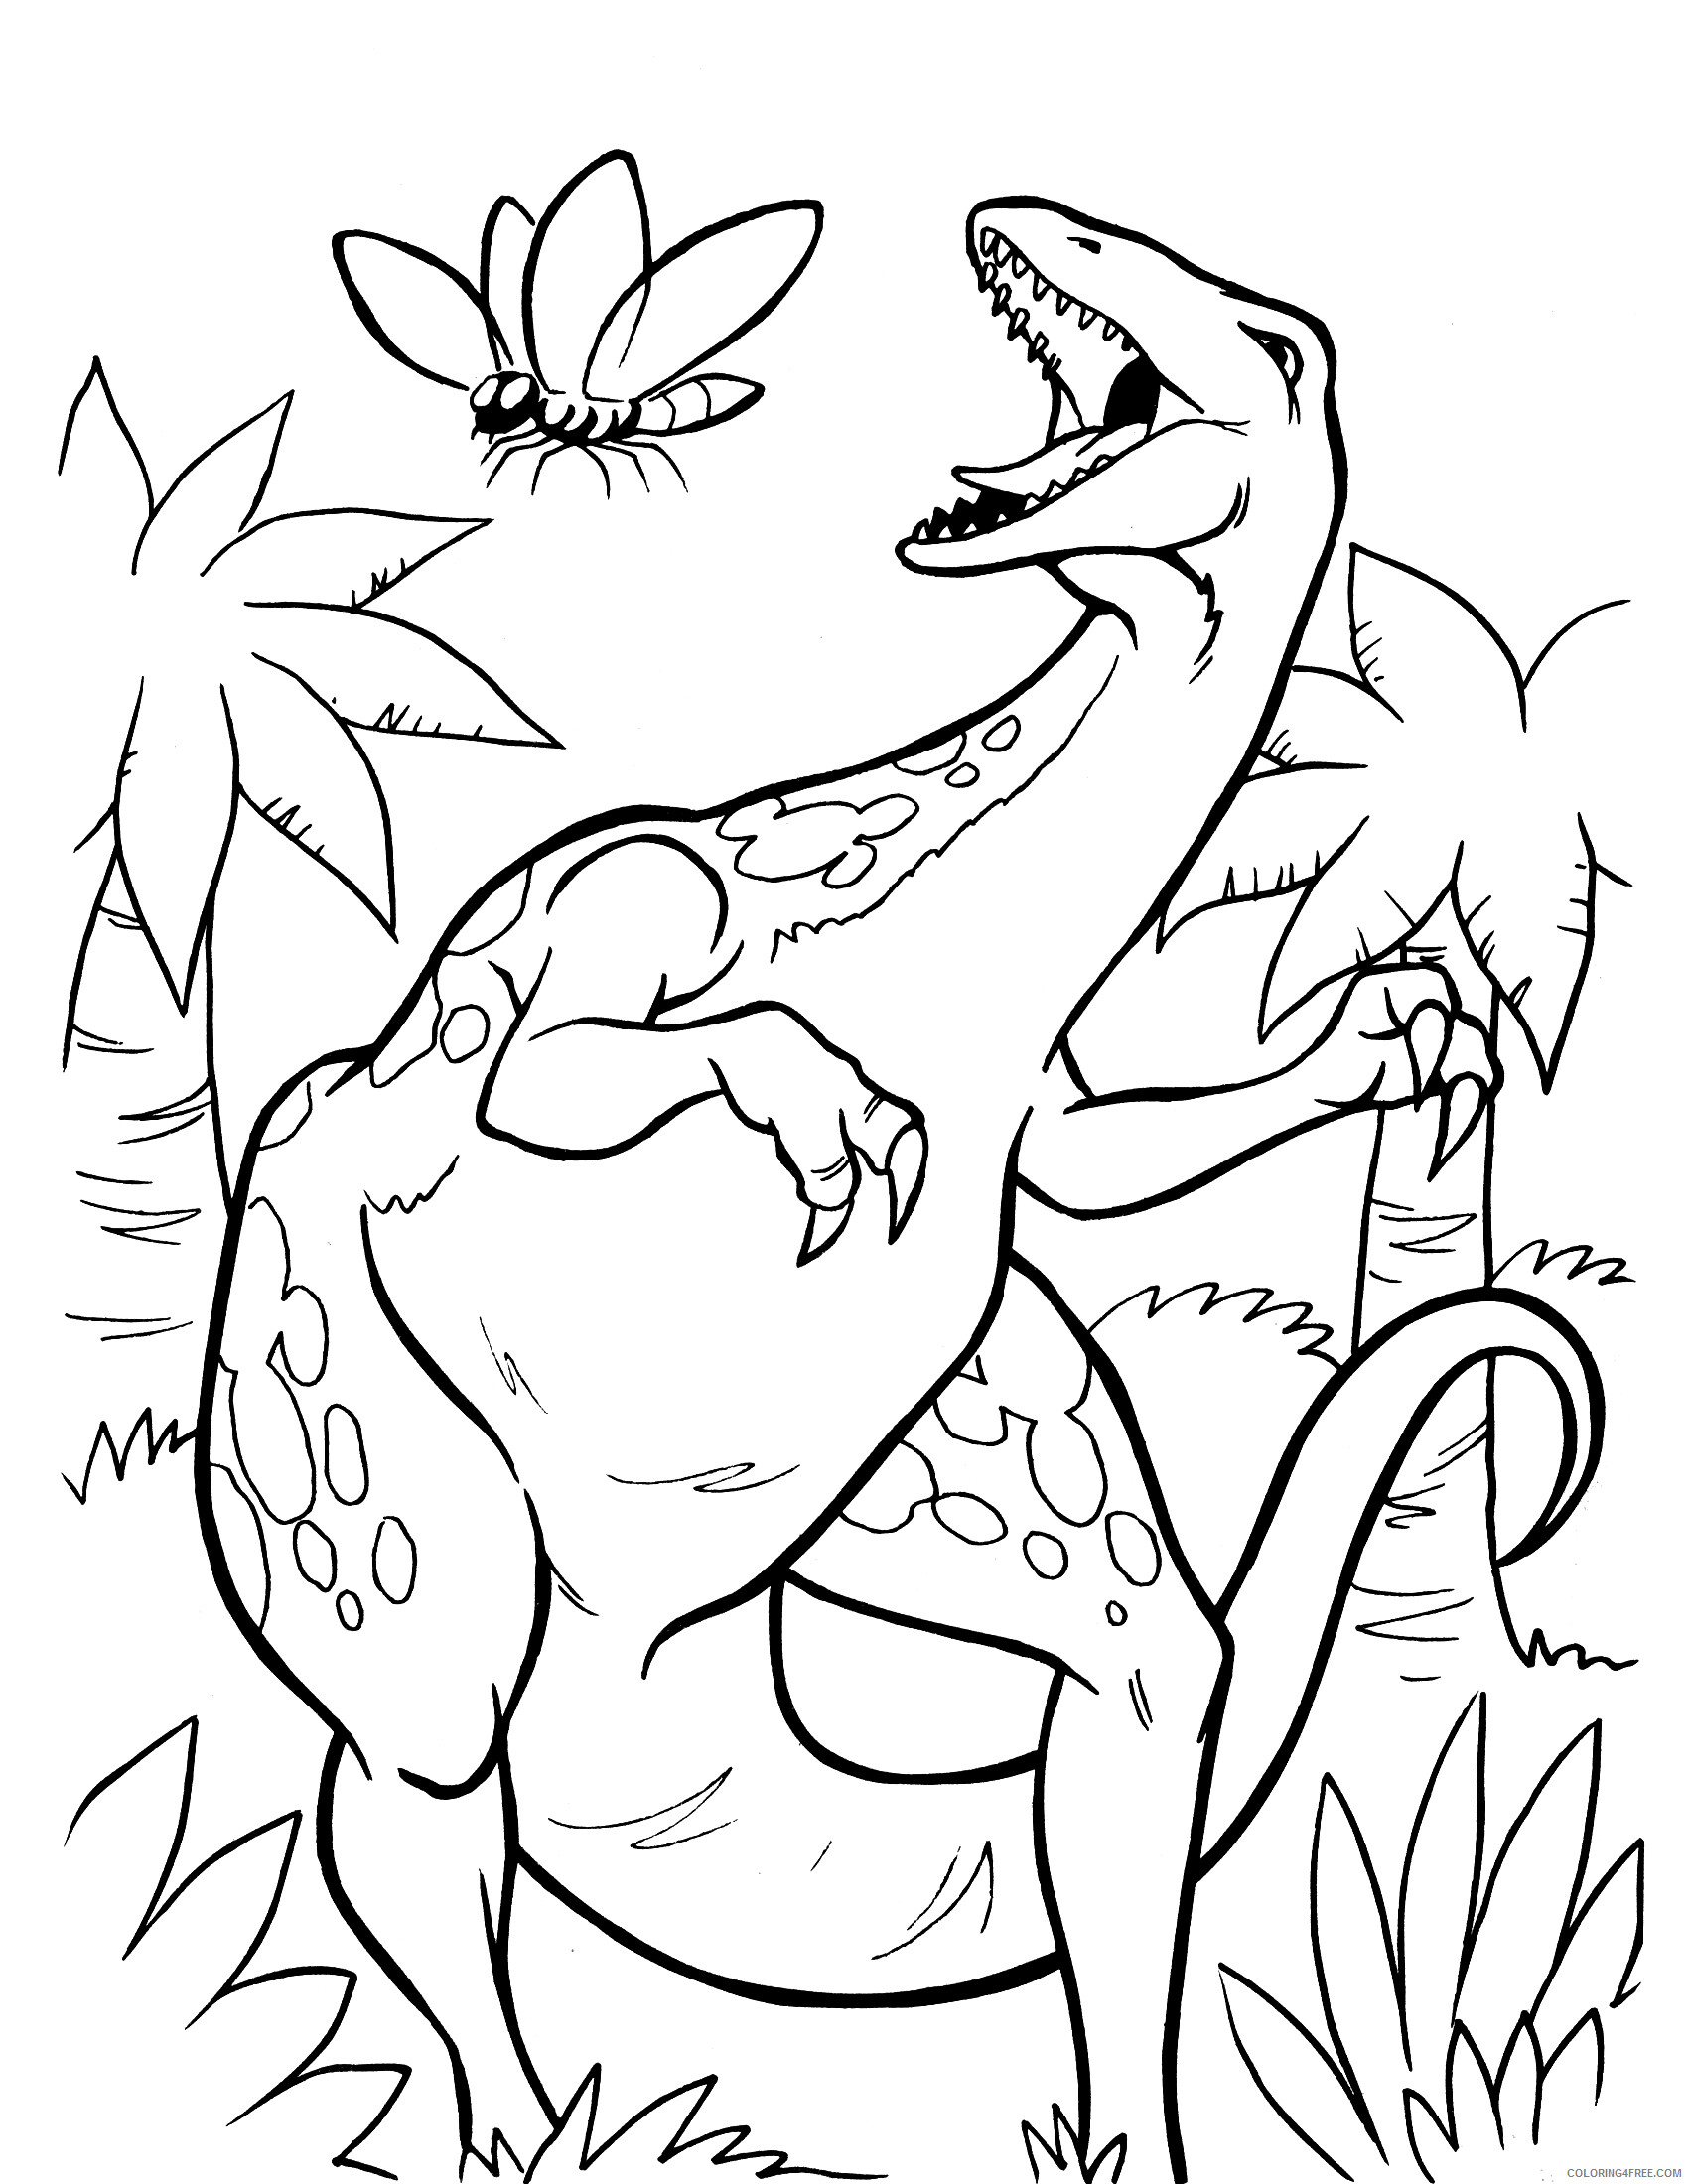 Jurassic World Coloring Pages for boys Jurassic Park T rex Printable 2020 0514 Coloring4free